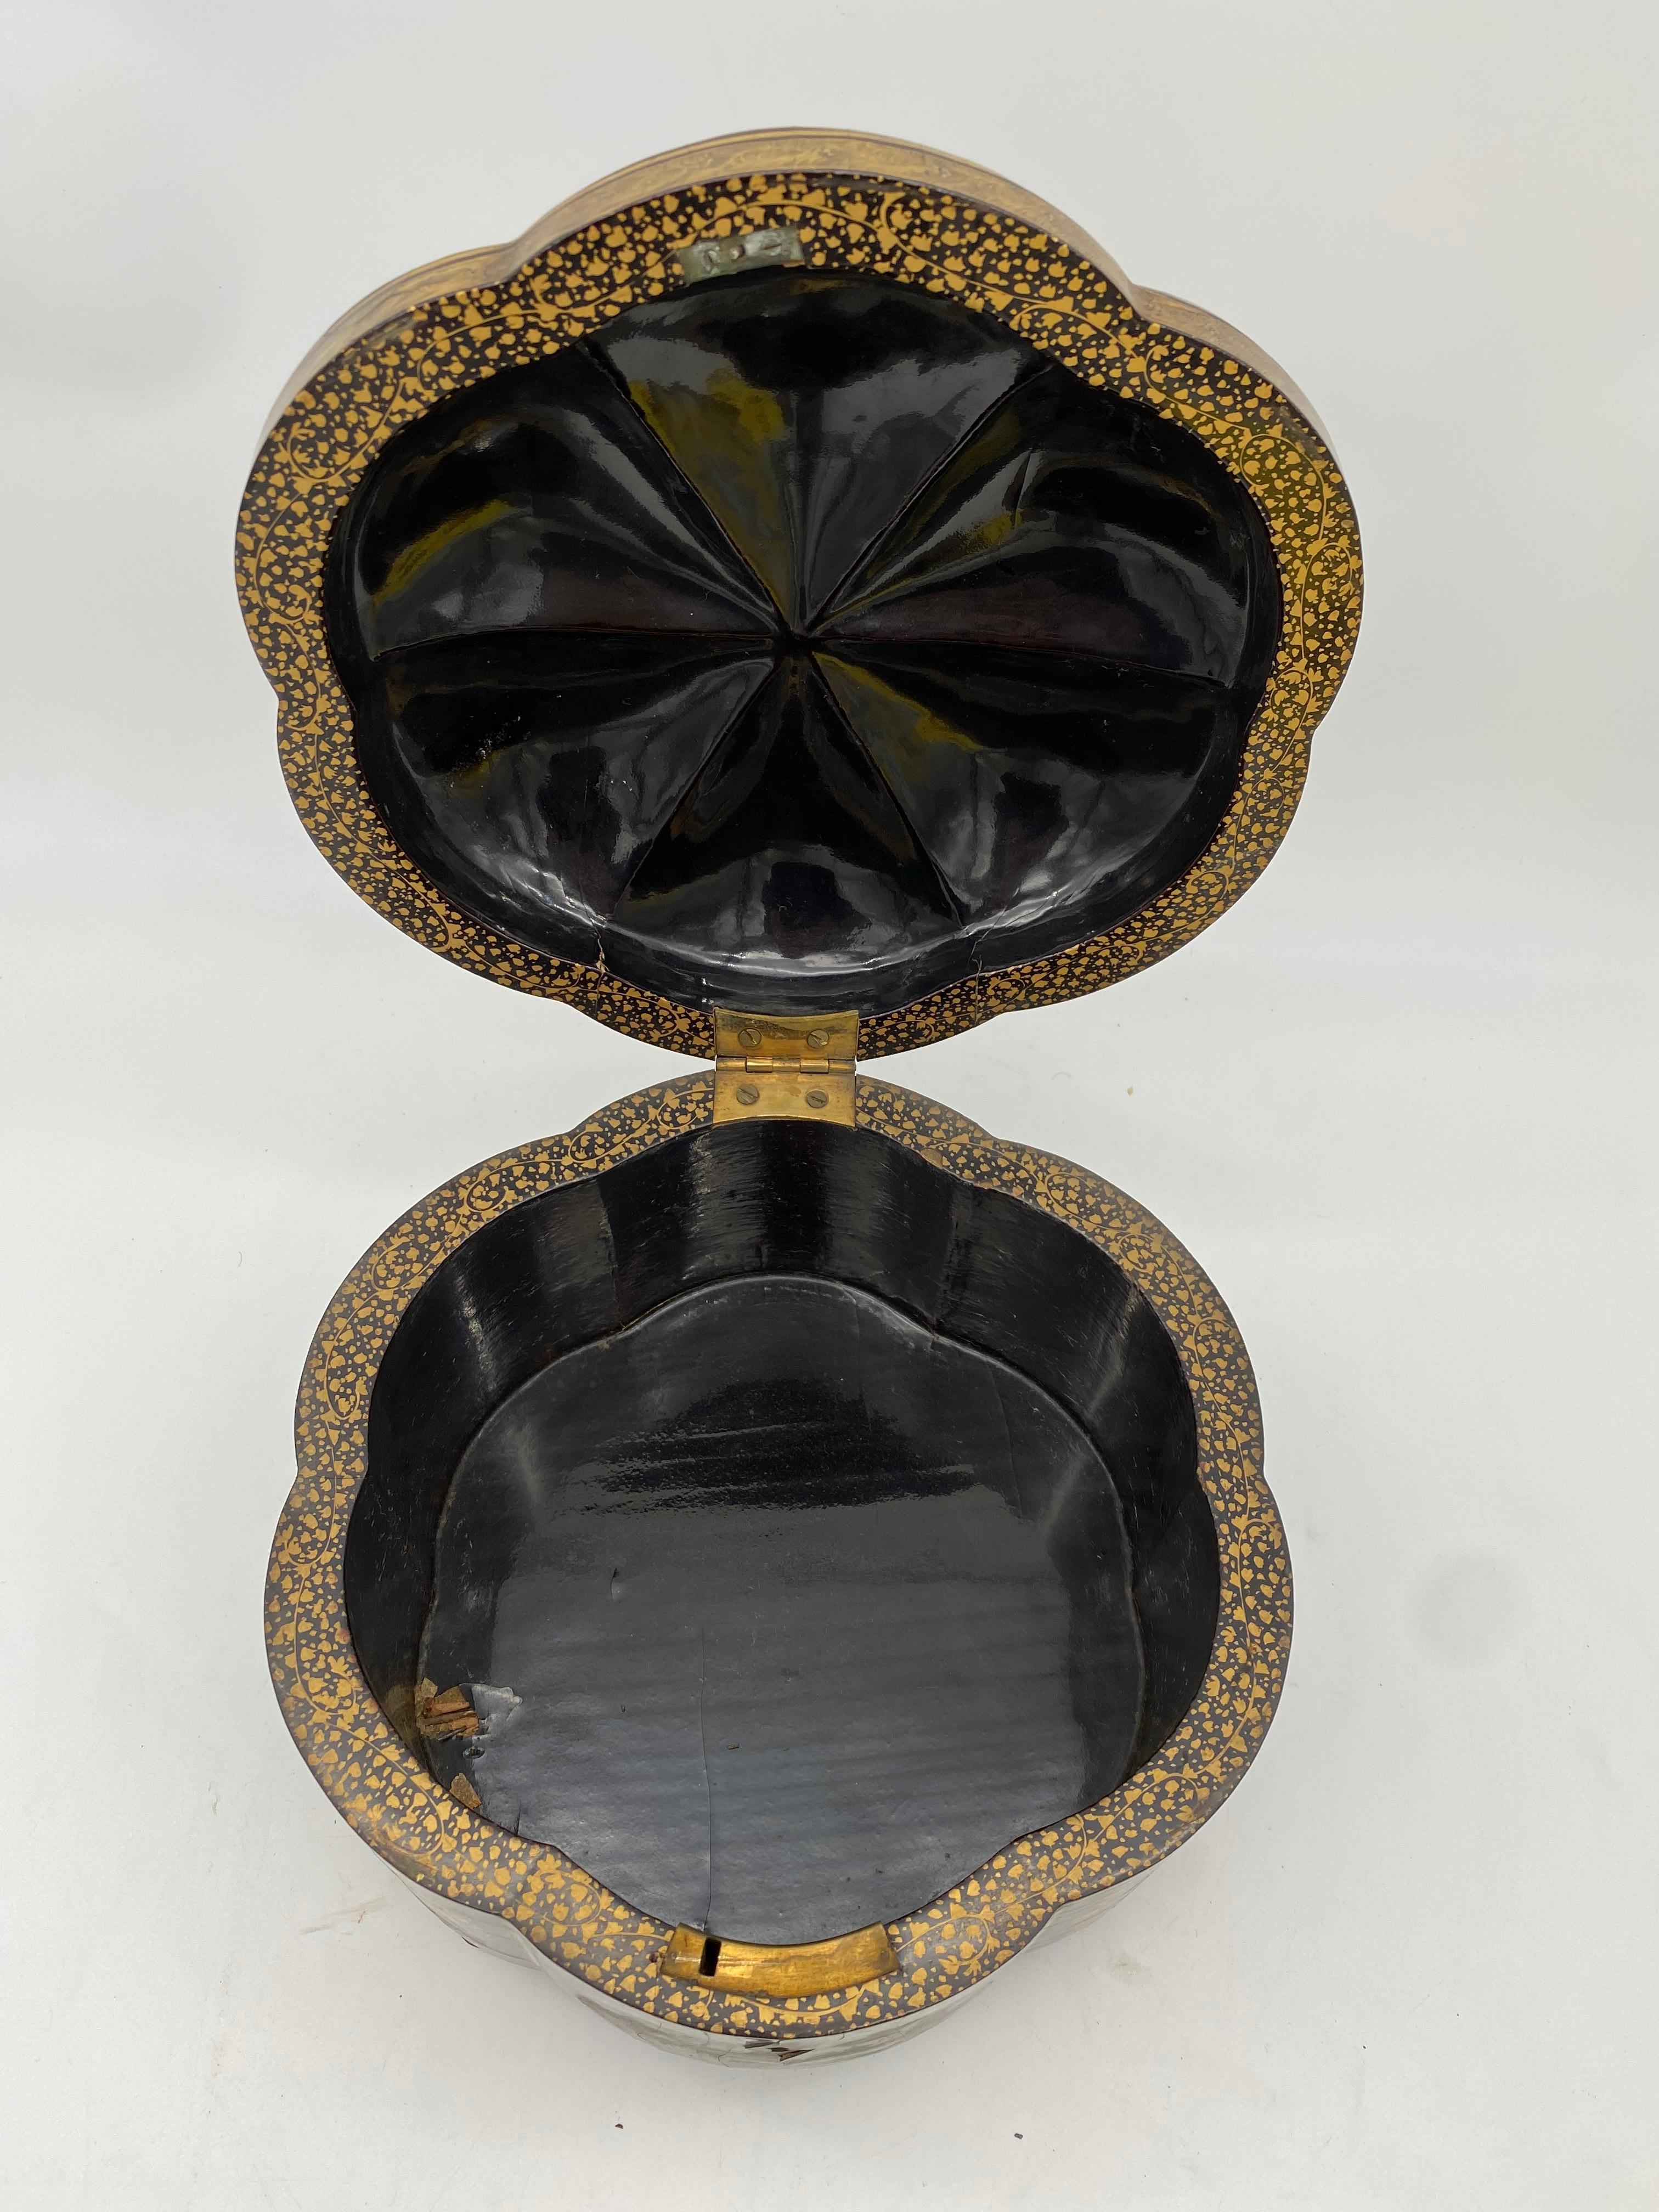 19th Century a Unique Gilt Chinese Lacquer Tea Caddy For Sale at 1stDibs